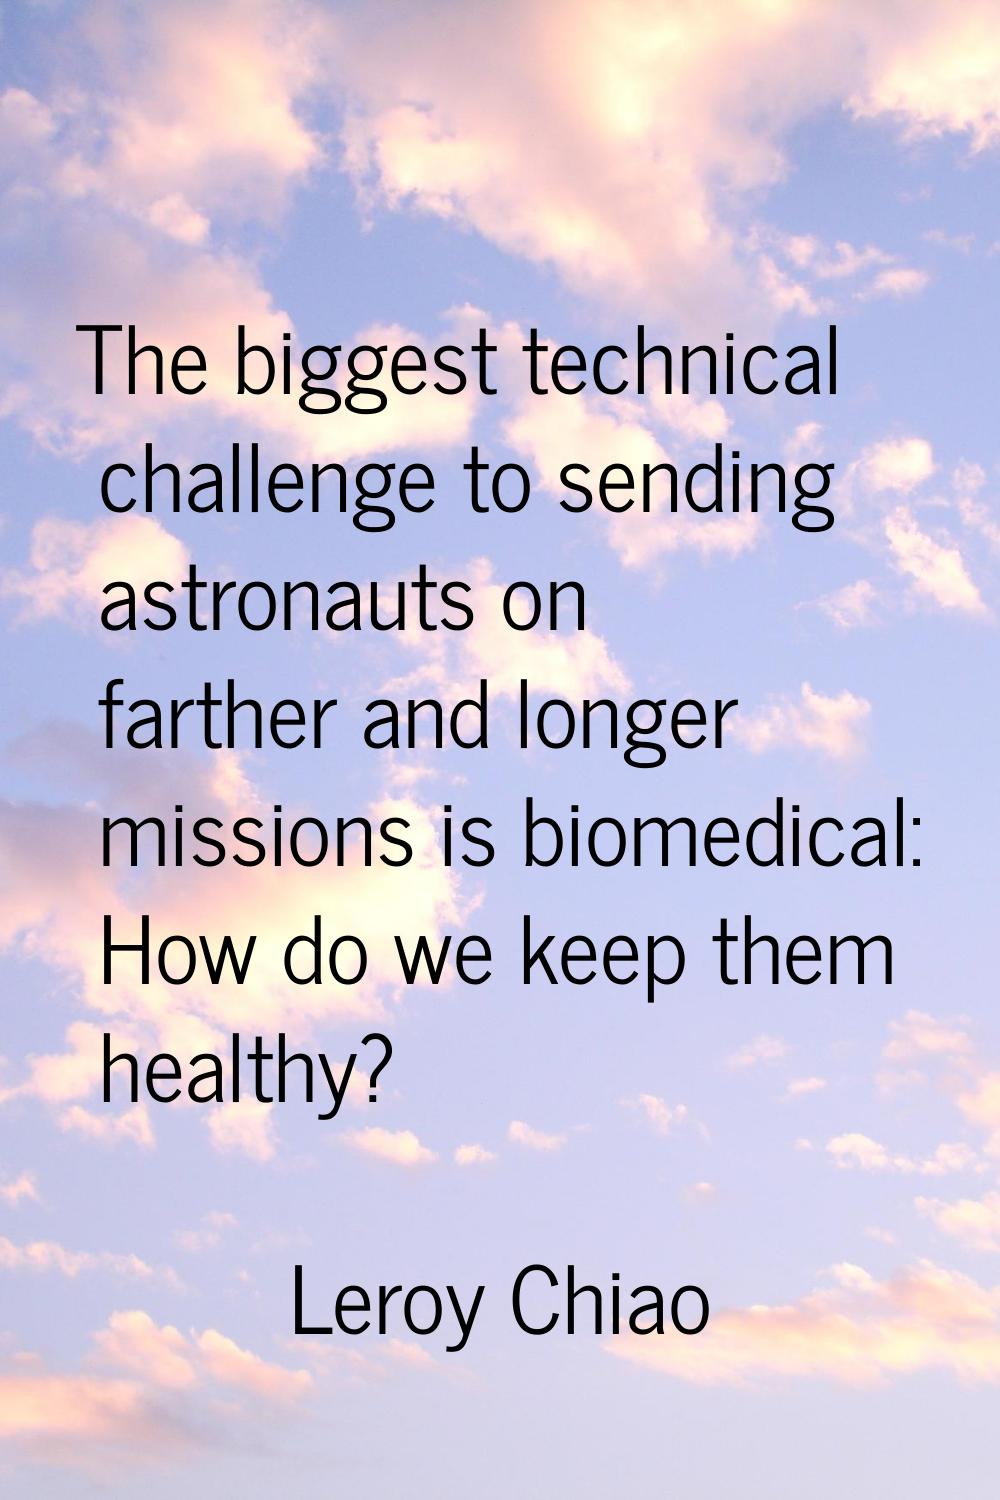 The biggest technical challenge to sending astronauts on farther and longer missions is biomedical: